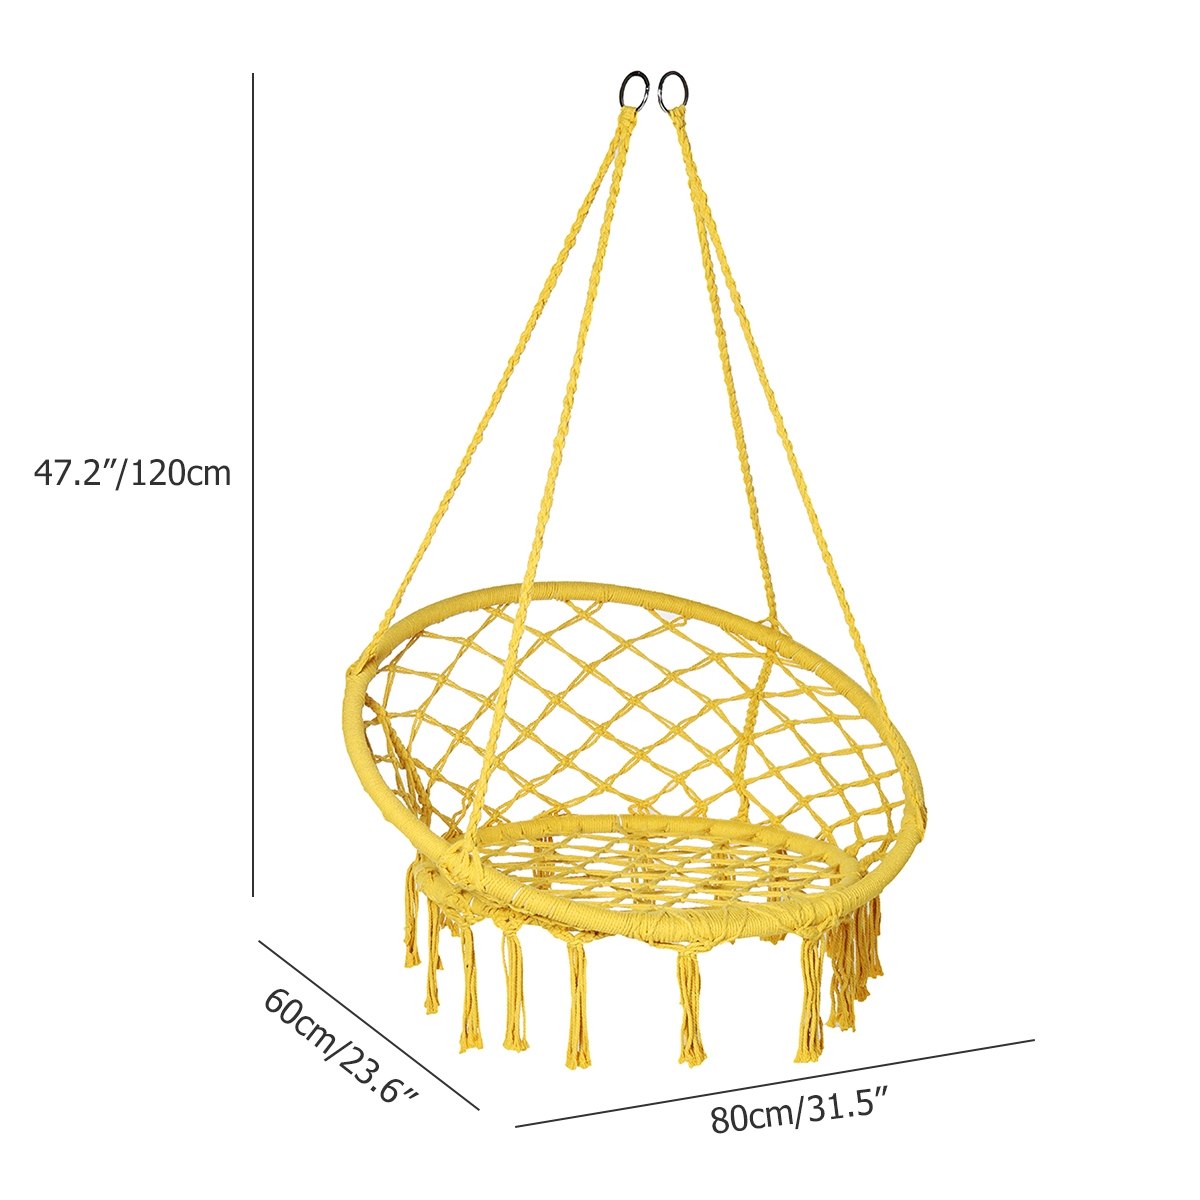 Cotton-Metal-Swing-Seat-Hanging-Chair-Hammock-Max-Load-240kg-for-Outdoor-Garden-Camping-1826564-2